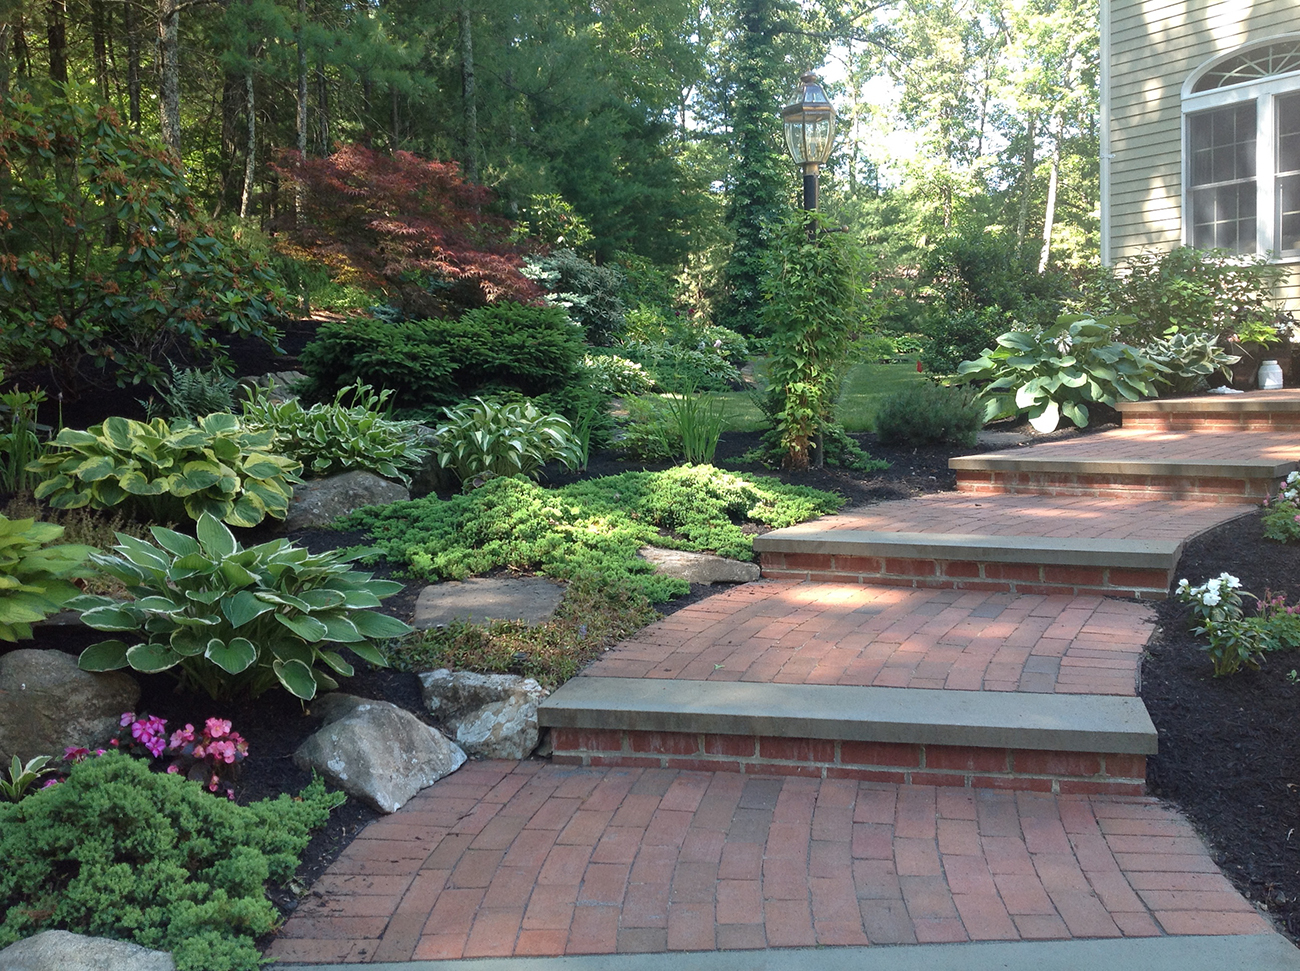 Natural Stone steps and wall as part of landscaping